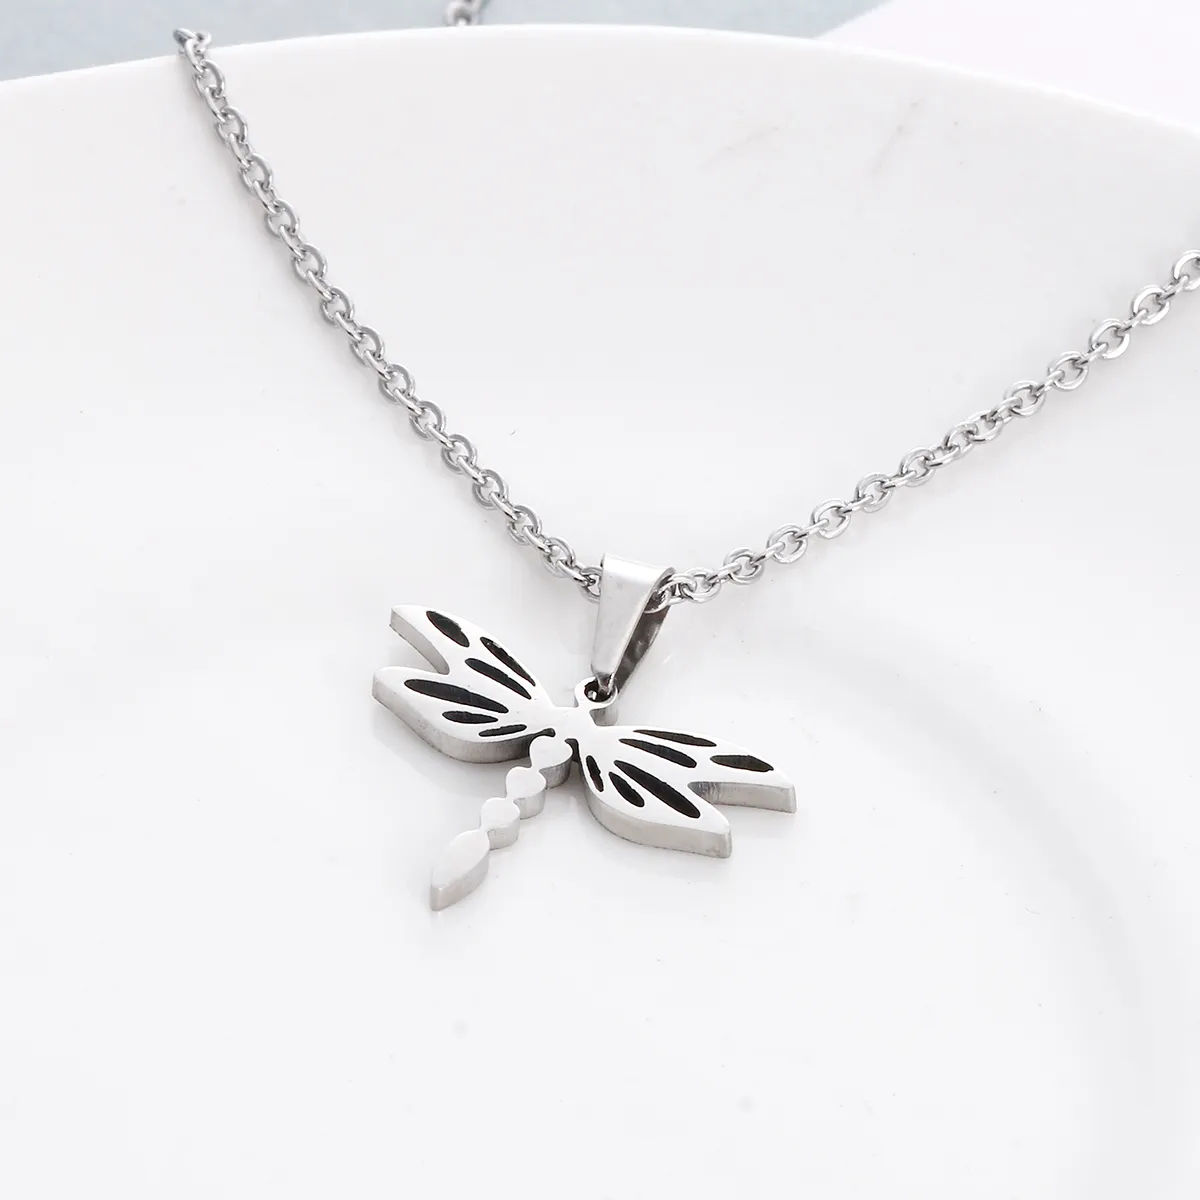 EVERFAST Cute Dragonfly Pendant Necklaces Stainless Steel O Chain Chokers Colar Insect Necklace Jewelry SN029